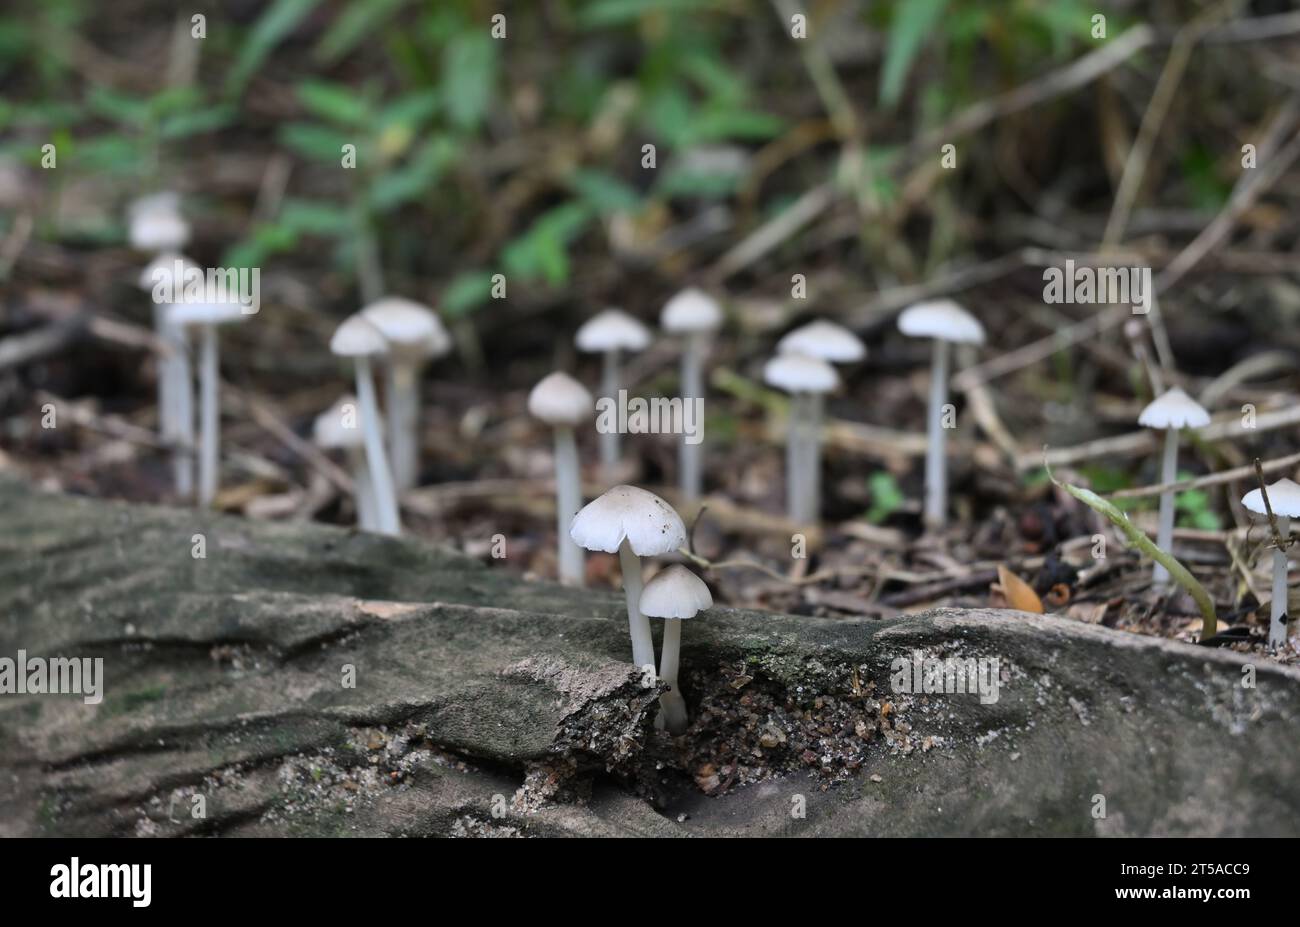 A ground level view shows Termitomyces Microcarpus mushrooms blooming on the surface of a dead tree stem and beyond it in the blurred background Stock Photo